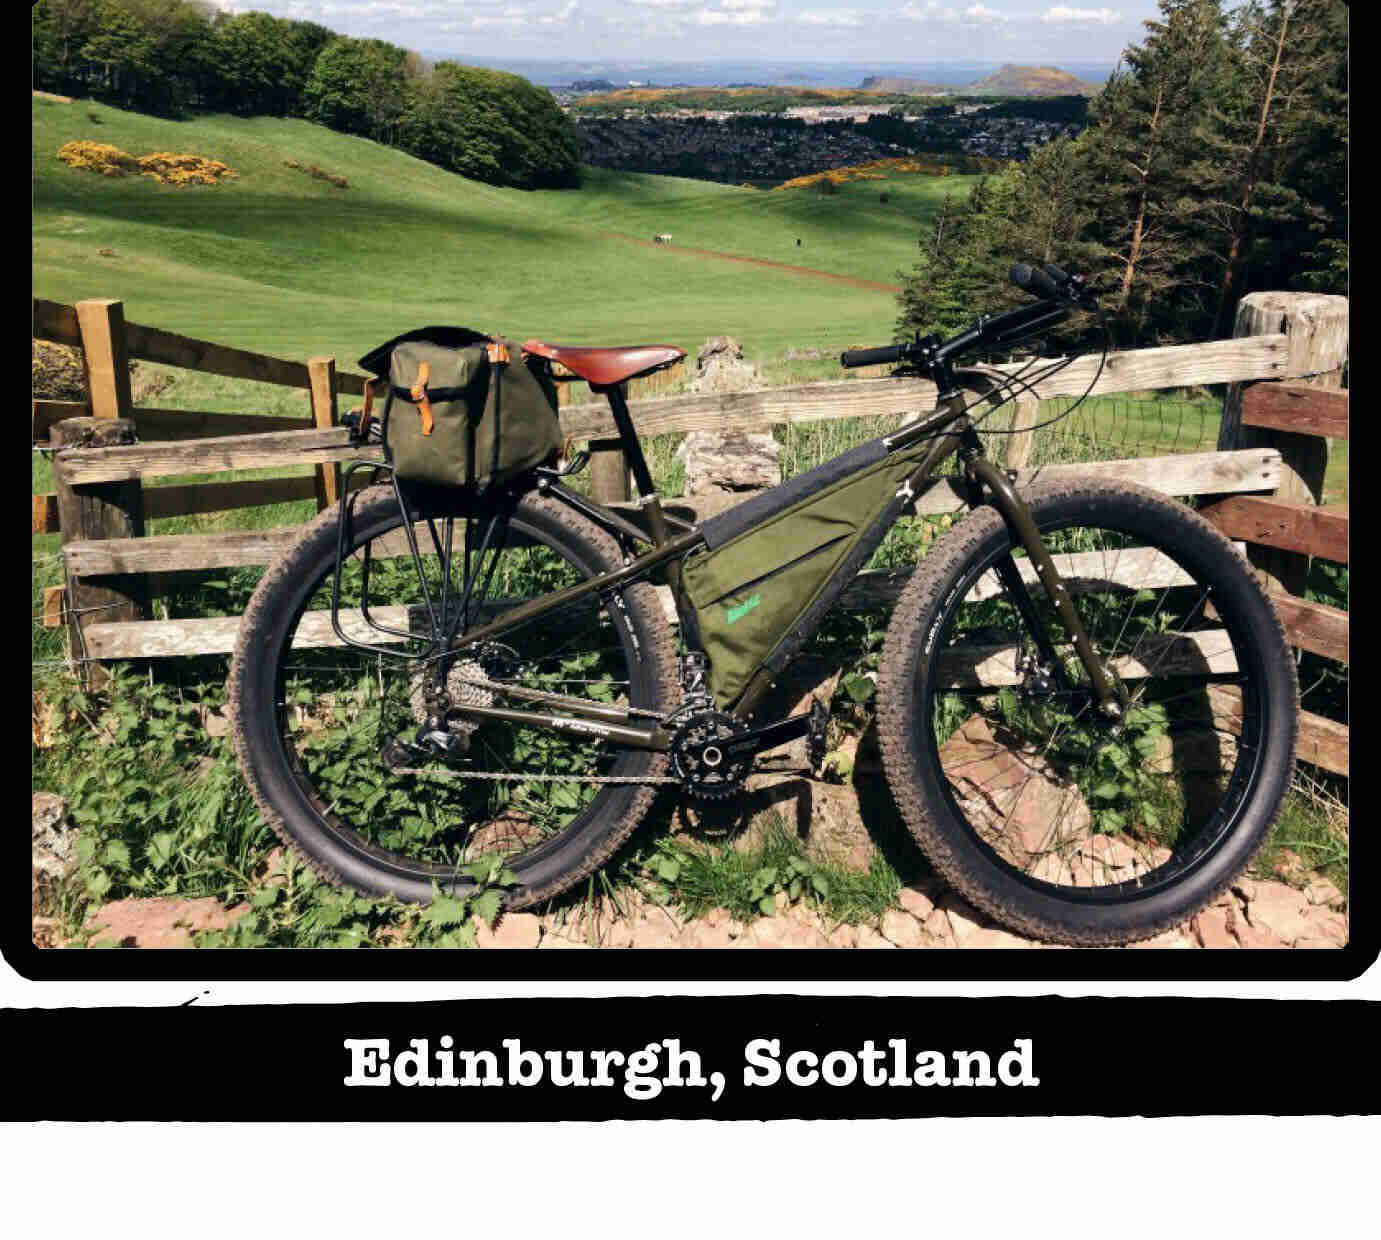 Right side view of Surly ECR bike, olive, against a wood fence - Edinburgh, Scotland tag below image